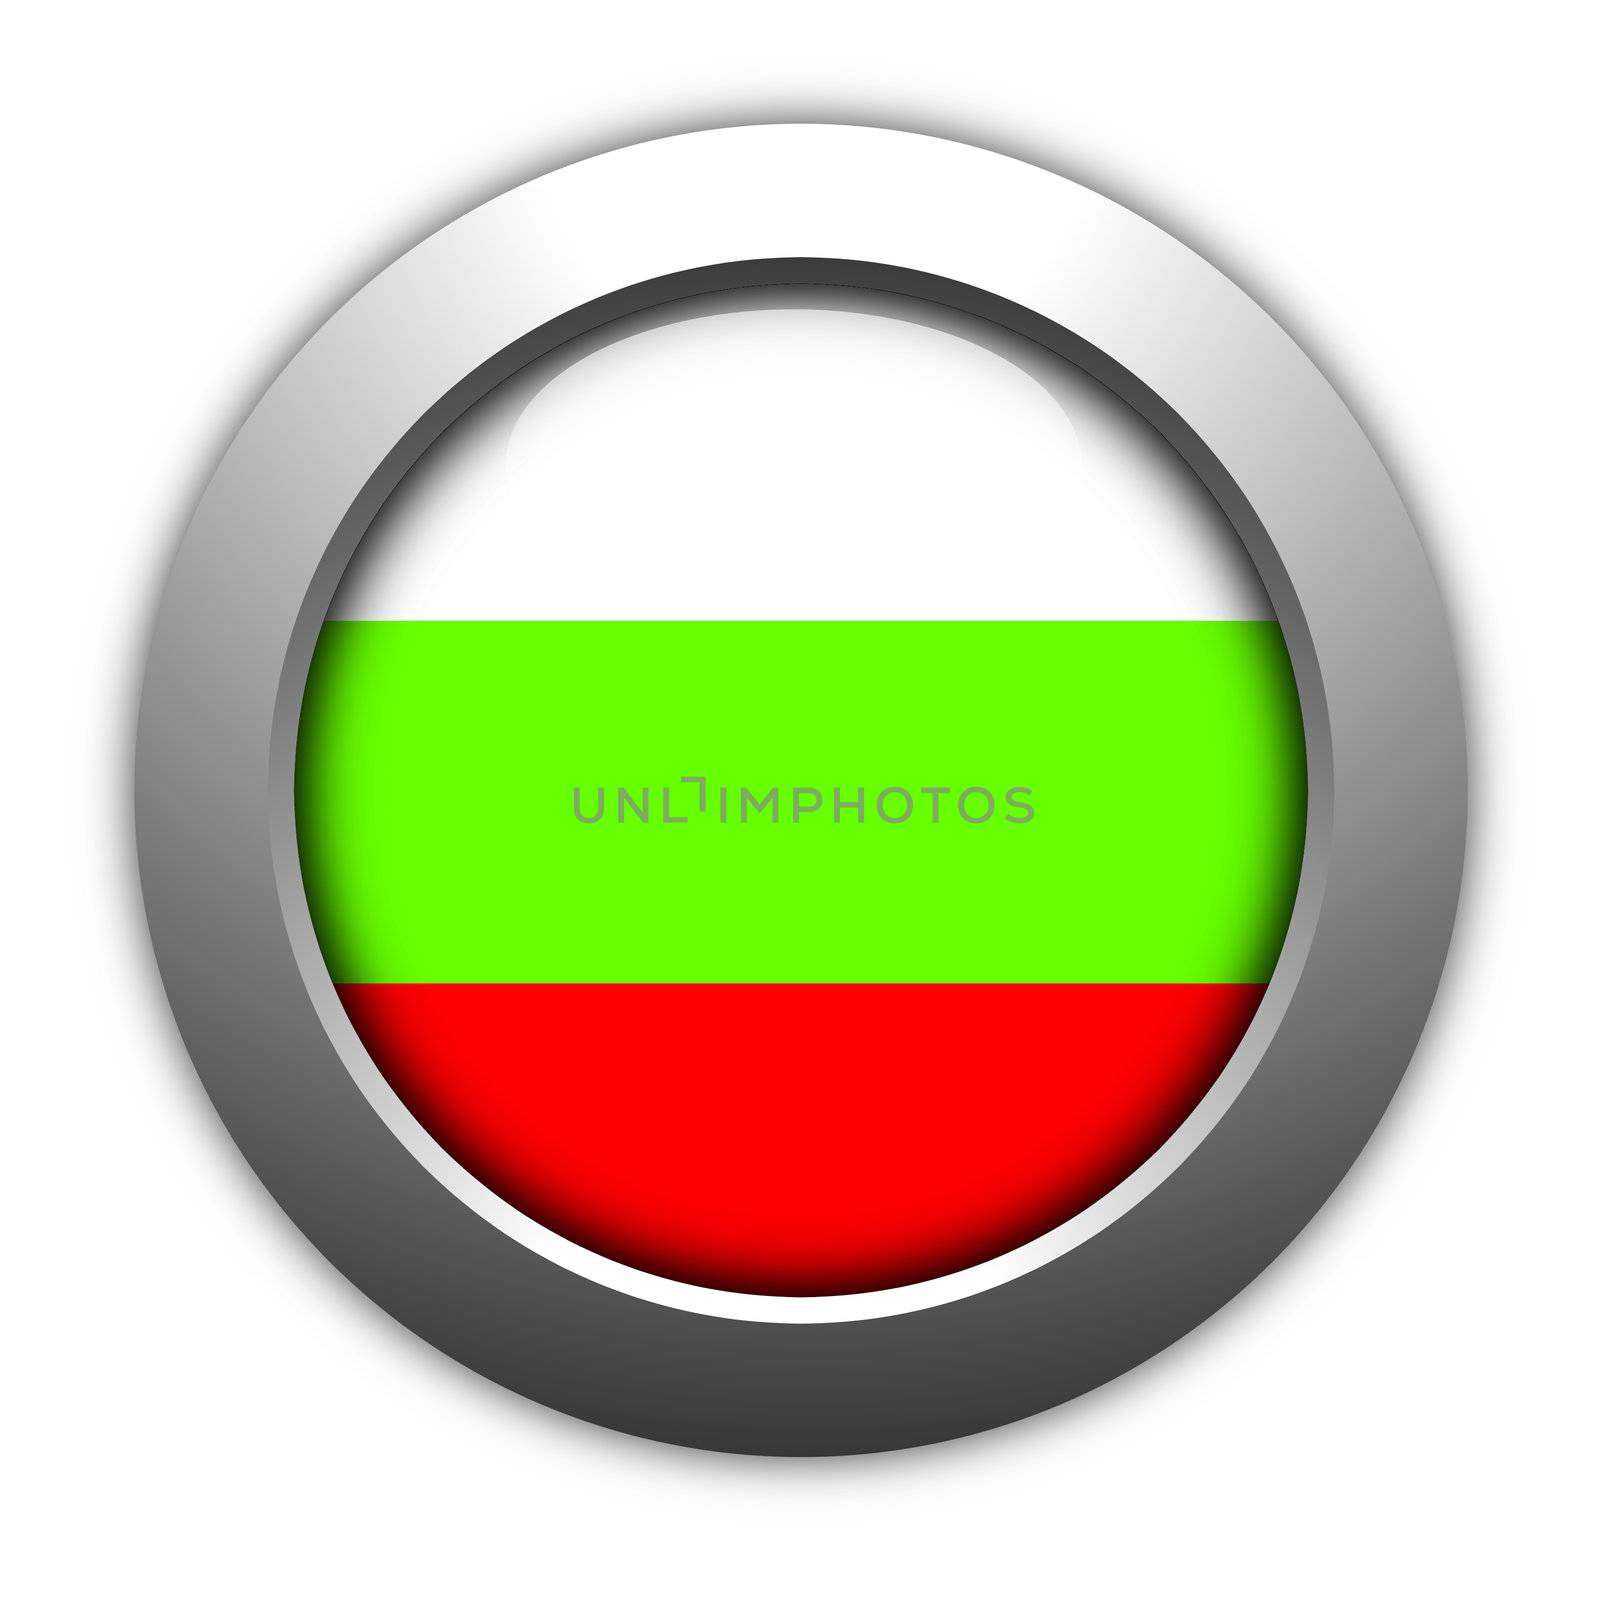 bulgaria button flag sign or badge for website